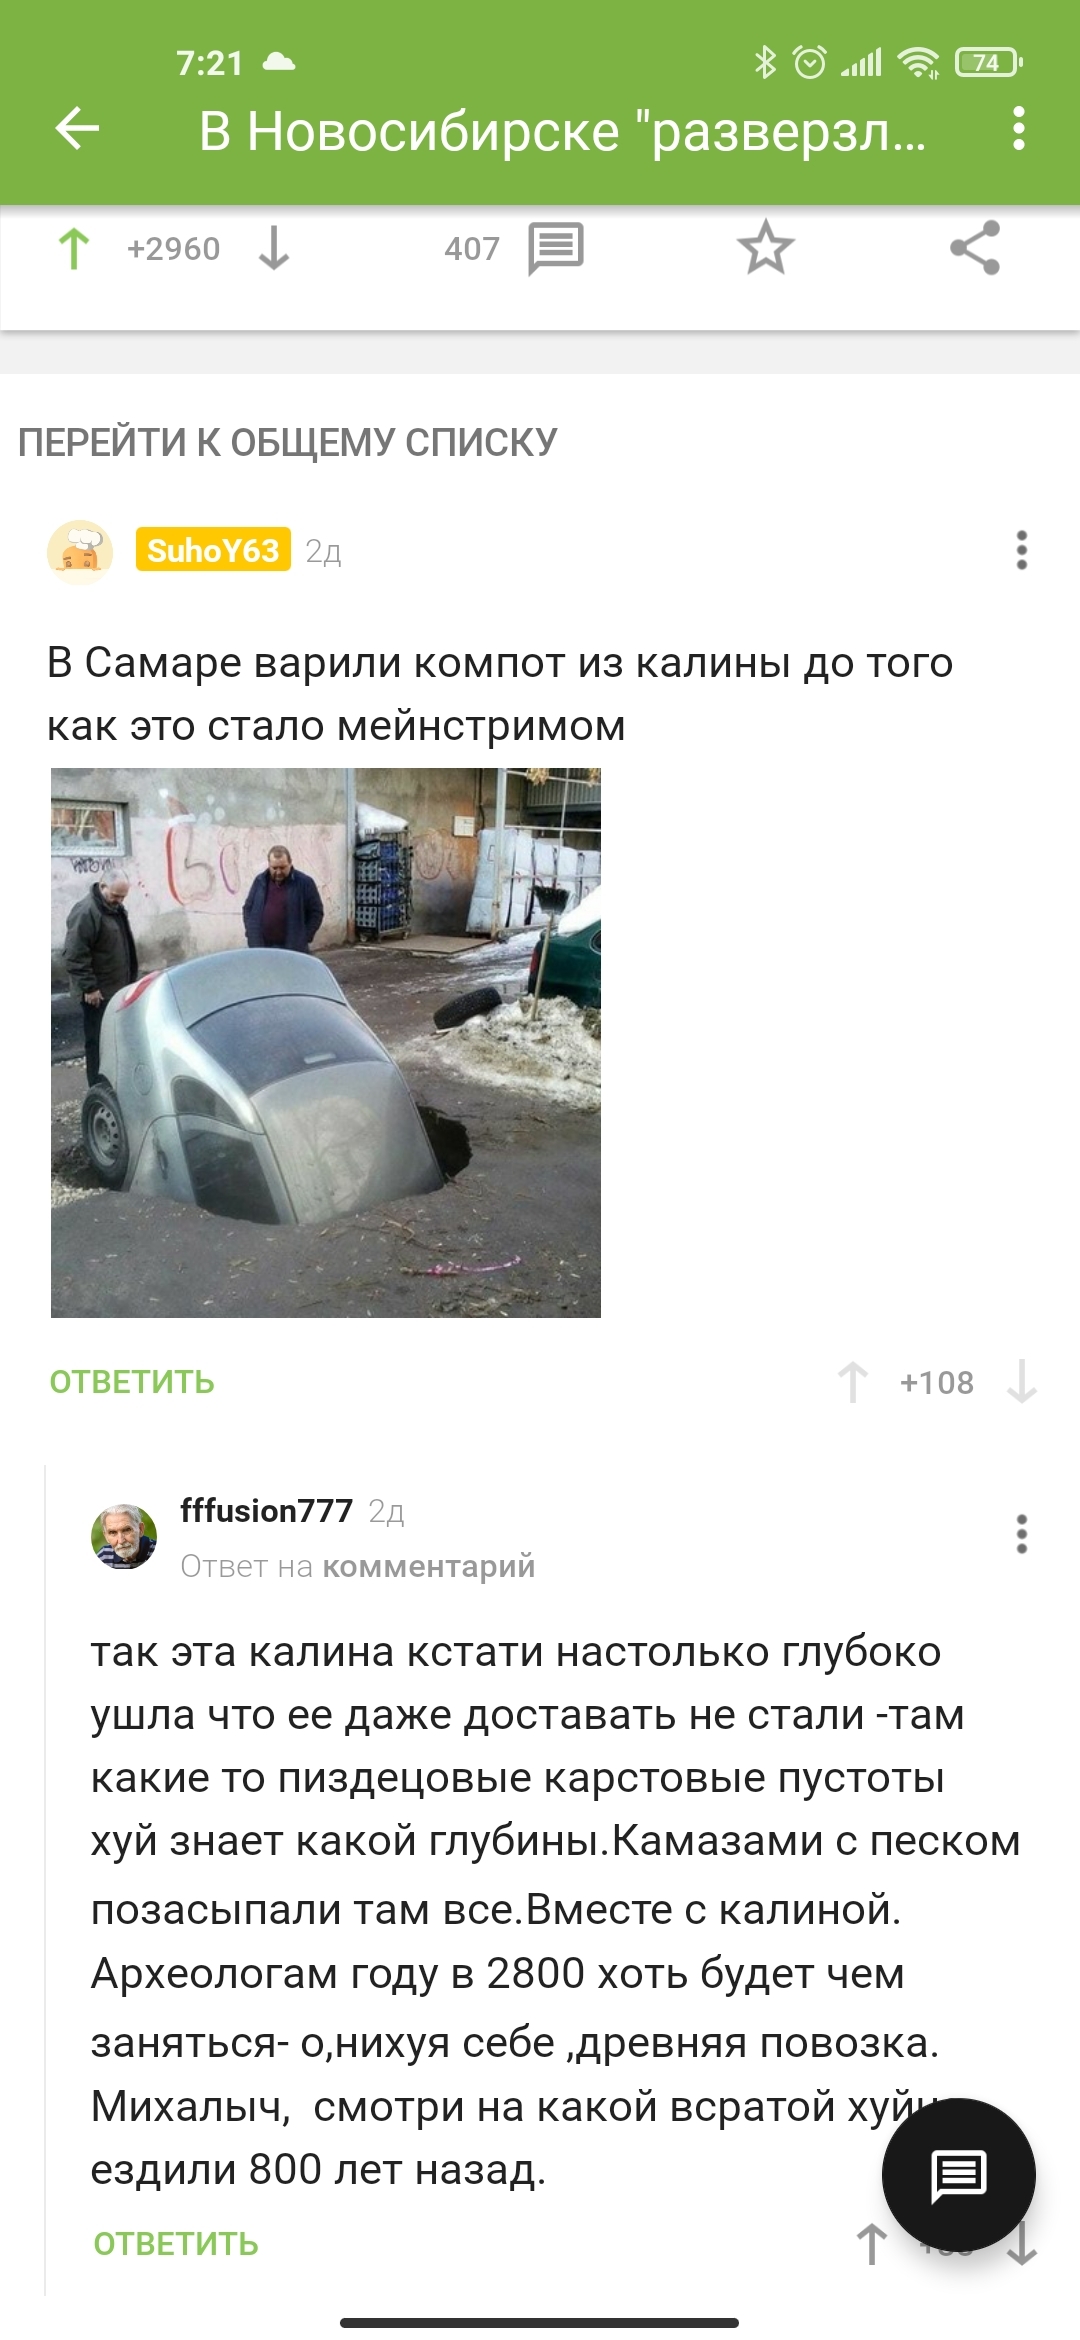 Reply to the post Opened in Novosibirsk. Svezhak - Novosibirsk, Road, Road accident, Pit, Failure, Samara, Utility services, Abyss, Video, Longpost